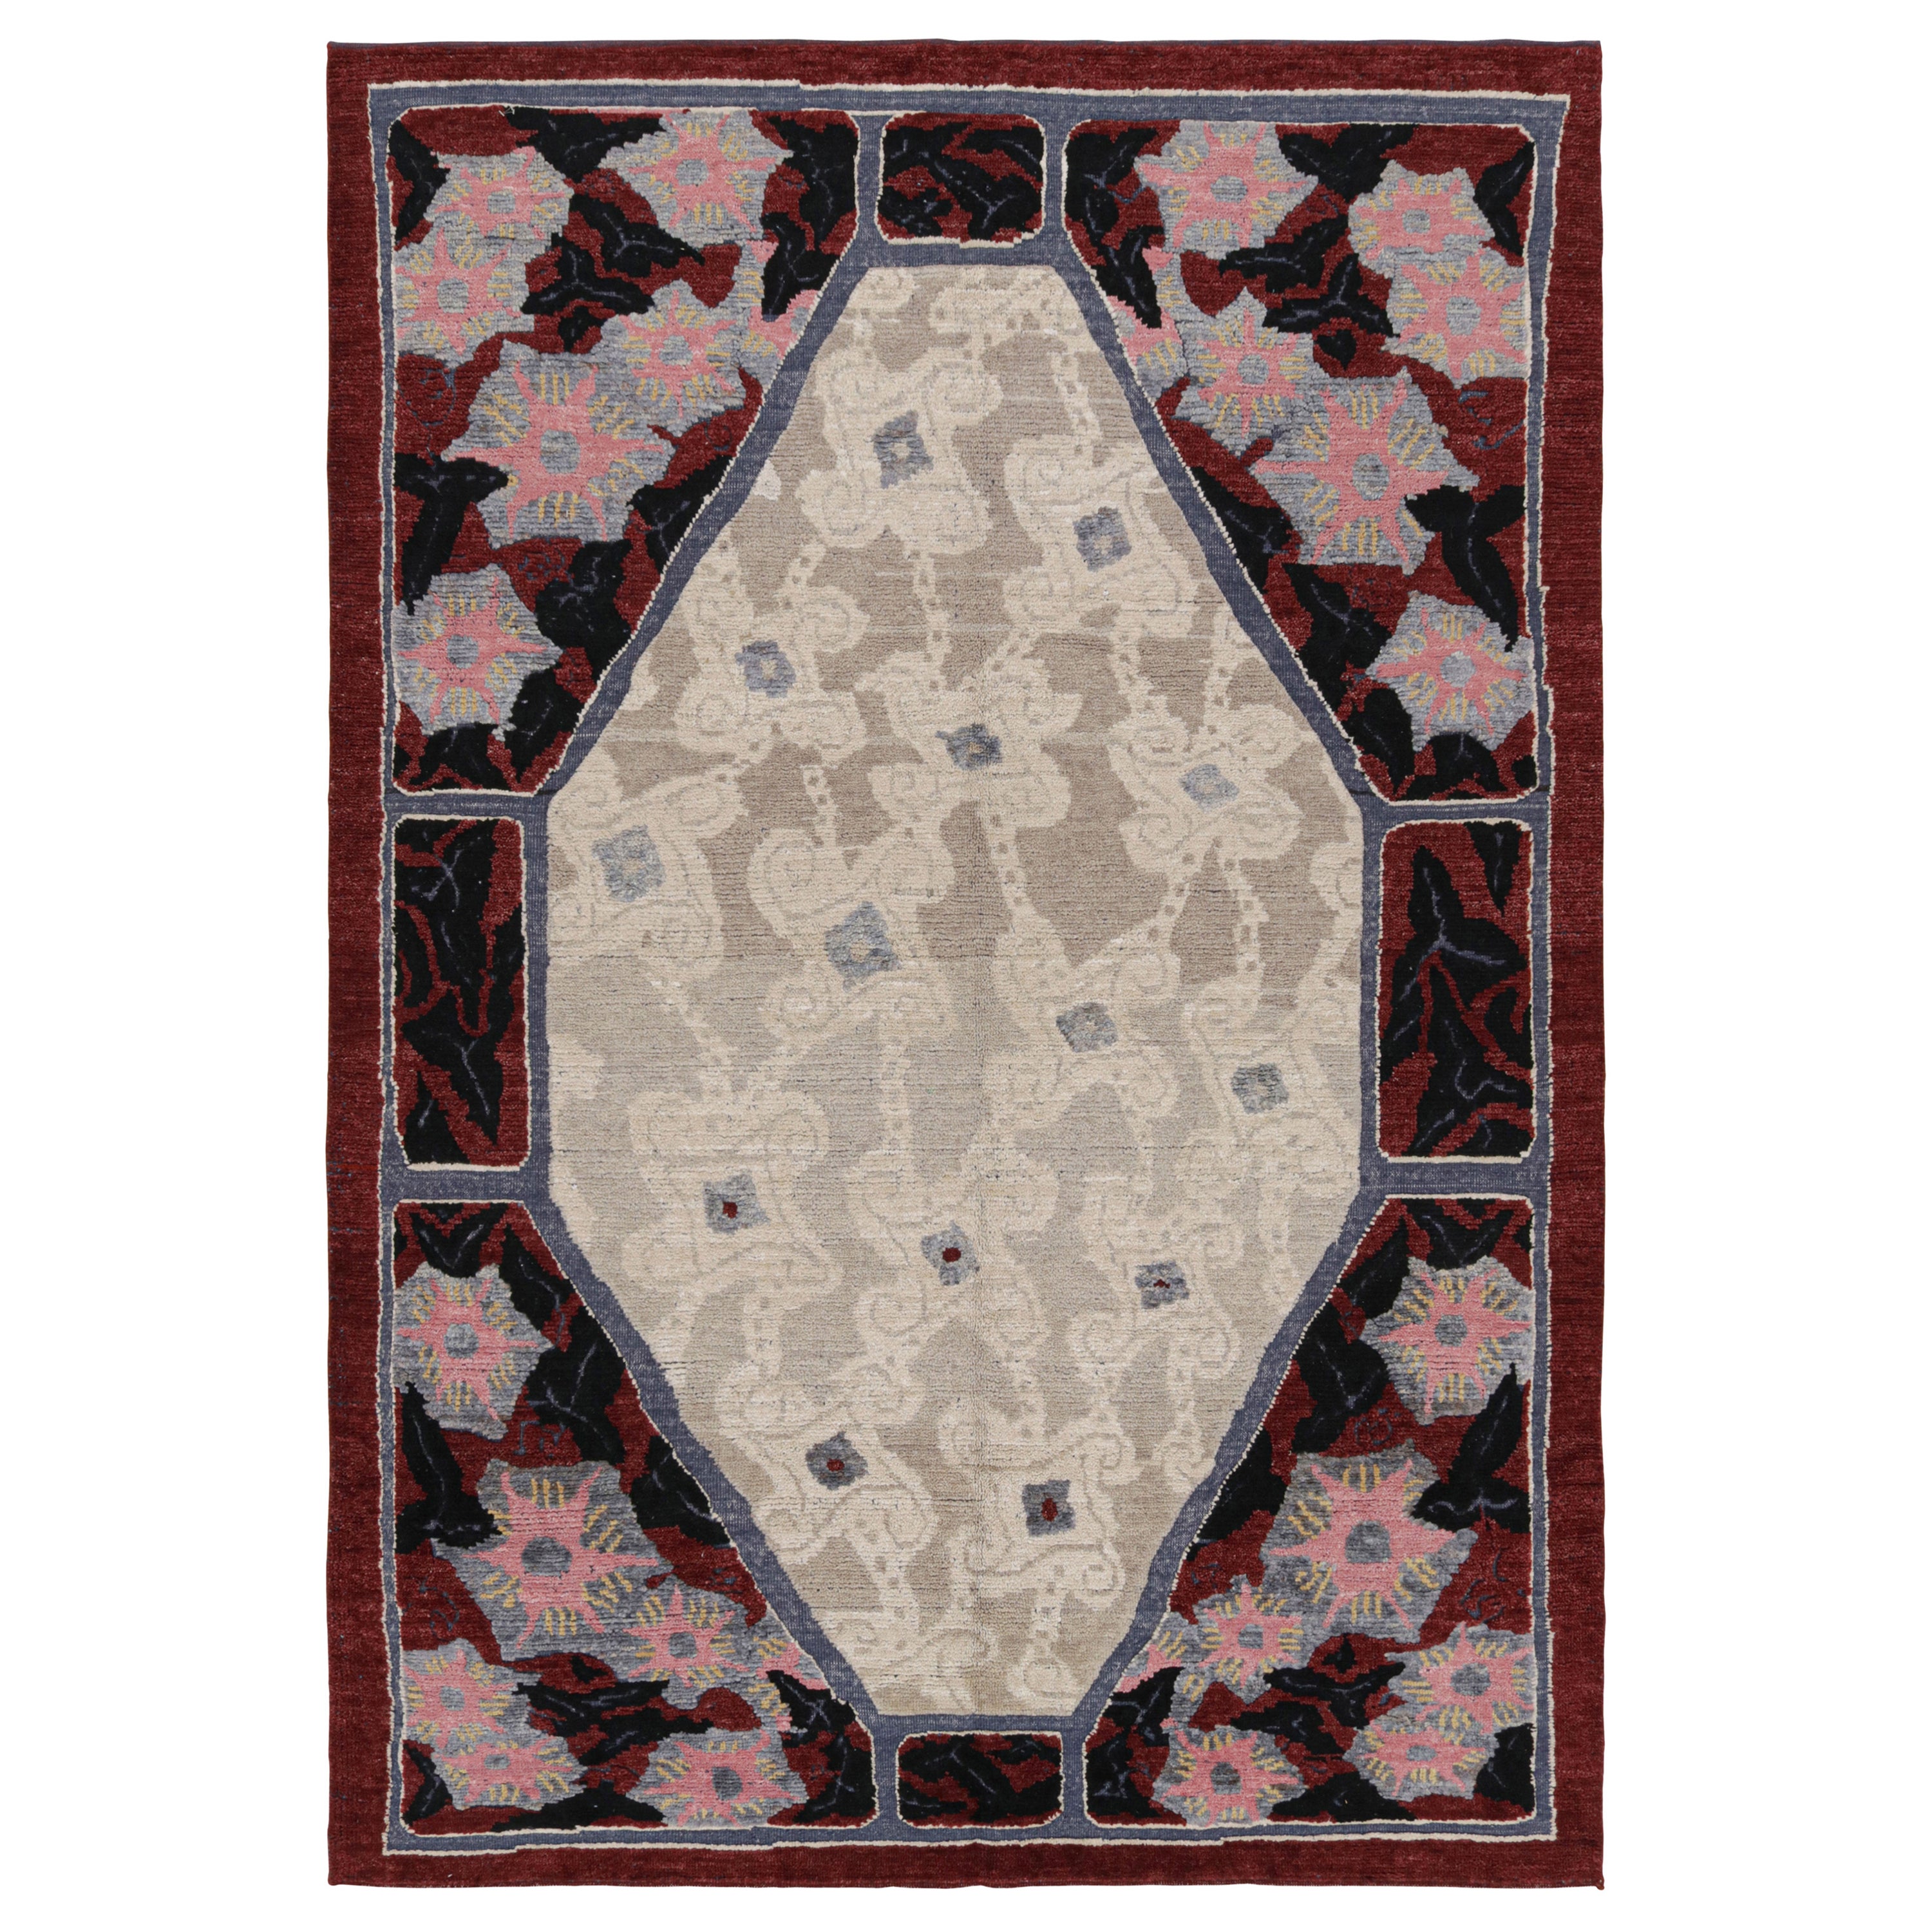 Rug & Kilim's French Art Deco Rug with with Beige and Red Geometric Patterns (Rug & Kilim's French Art Deco Rug's French Art Deco Rug's French Art Deco Rug's French Art Deco Patterns (Rug & Kilim's French Art Deco Rug's French Art Deco Patterns)  en vente